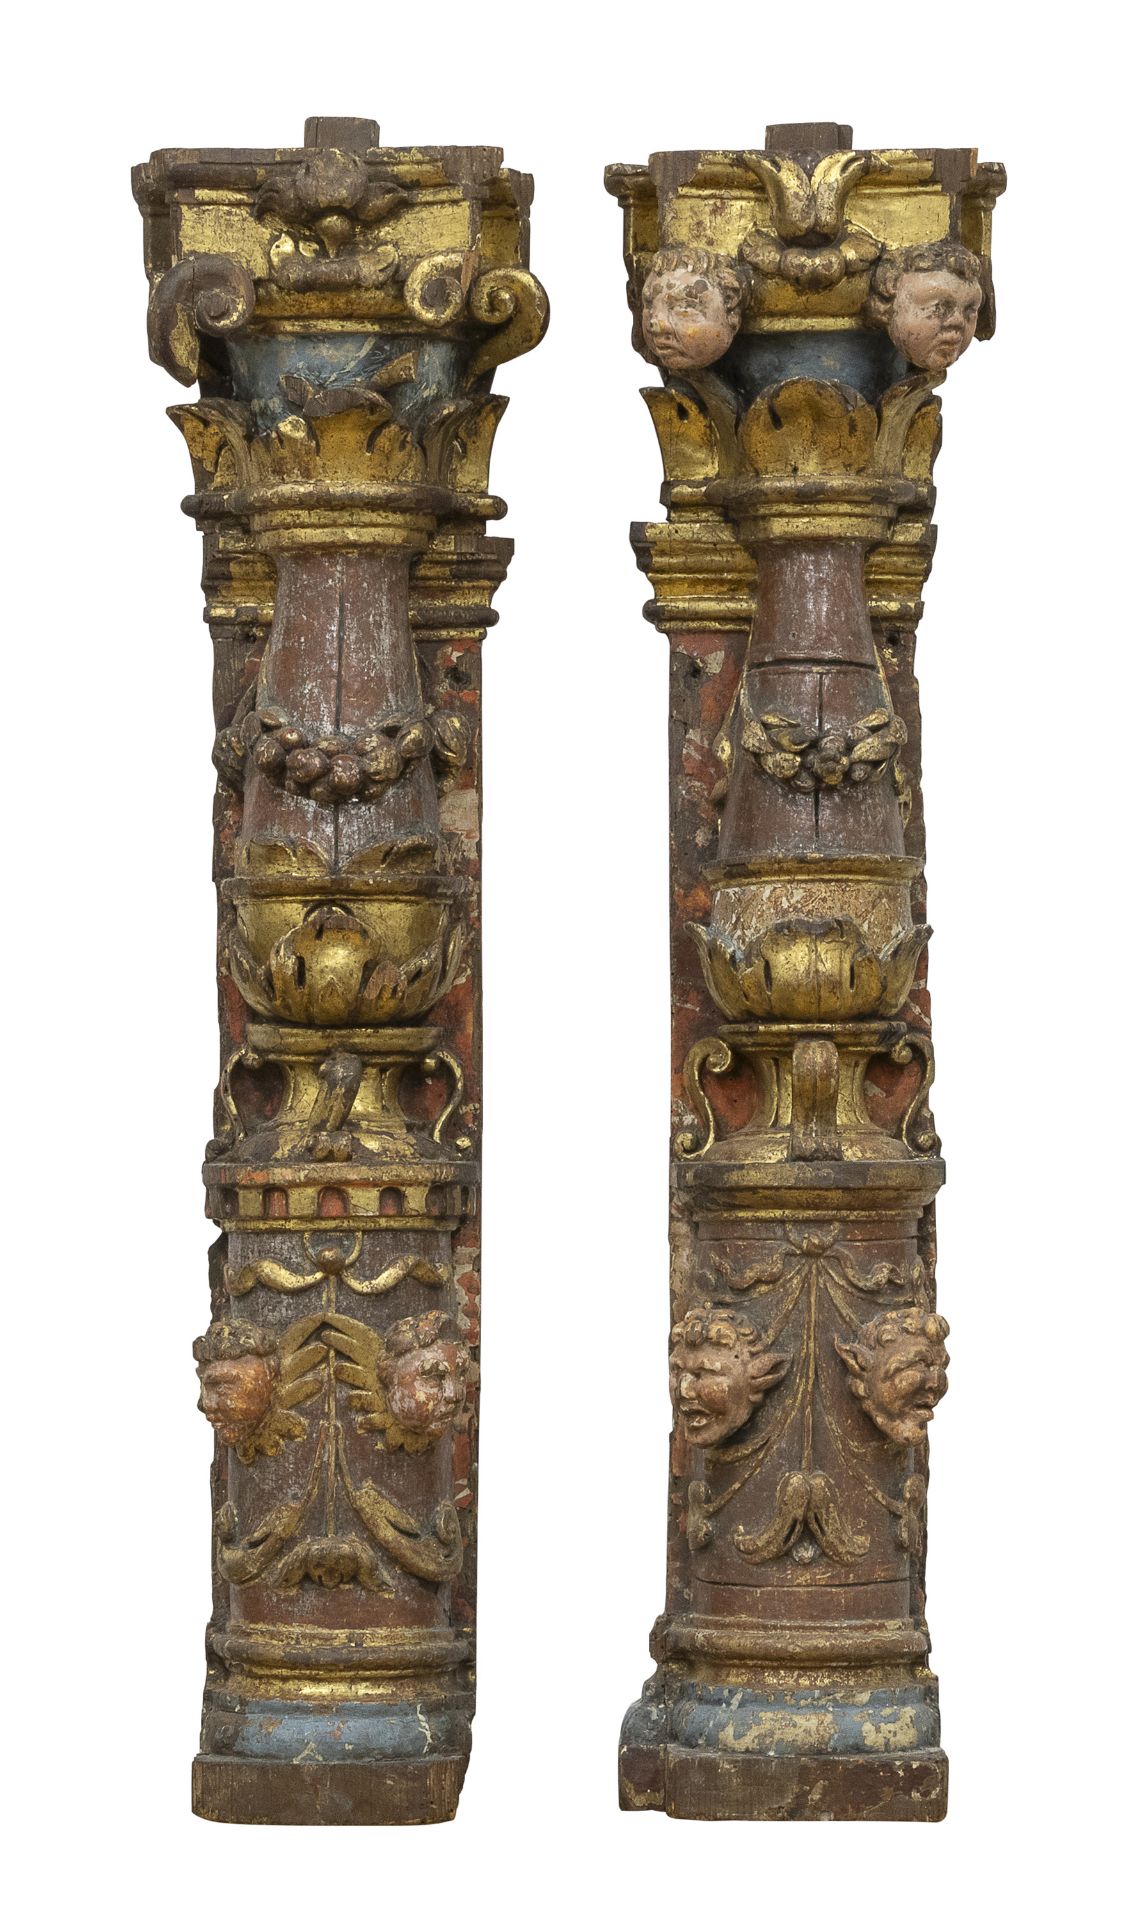 PAIR OF SMALL LACQUERED WOOD COLUMNS NORTHERN ITALY 17TH CENTURY